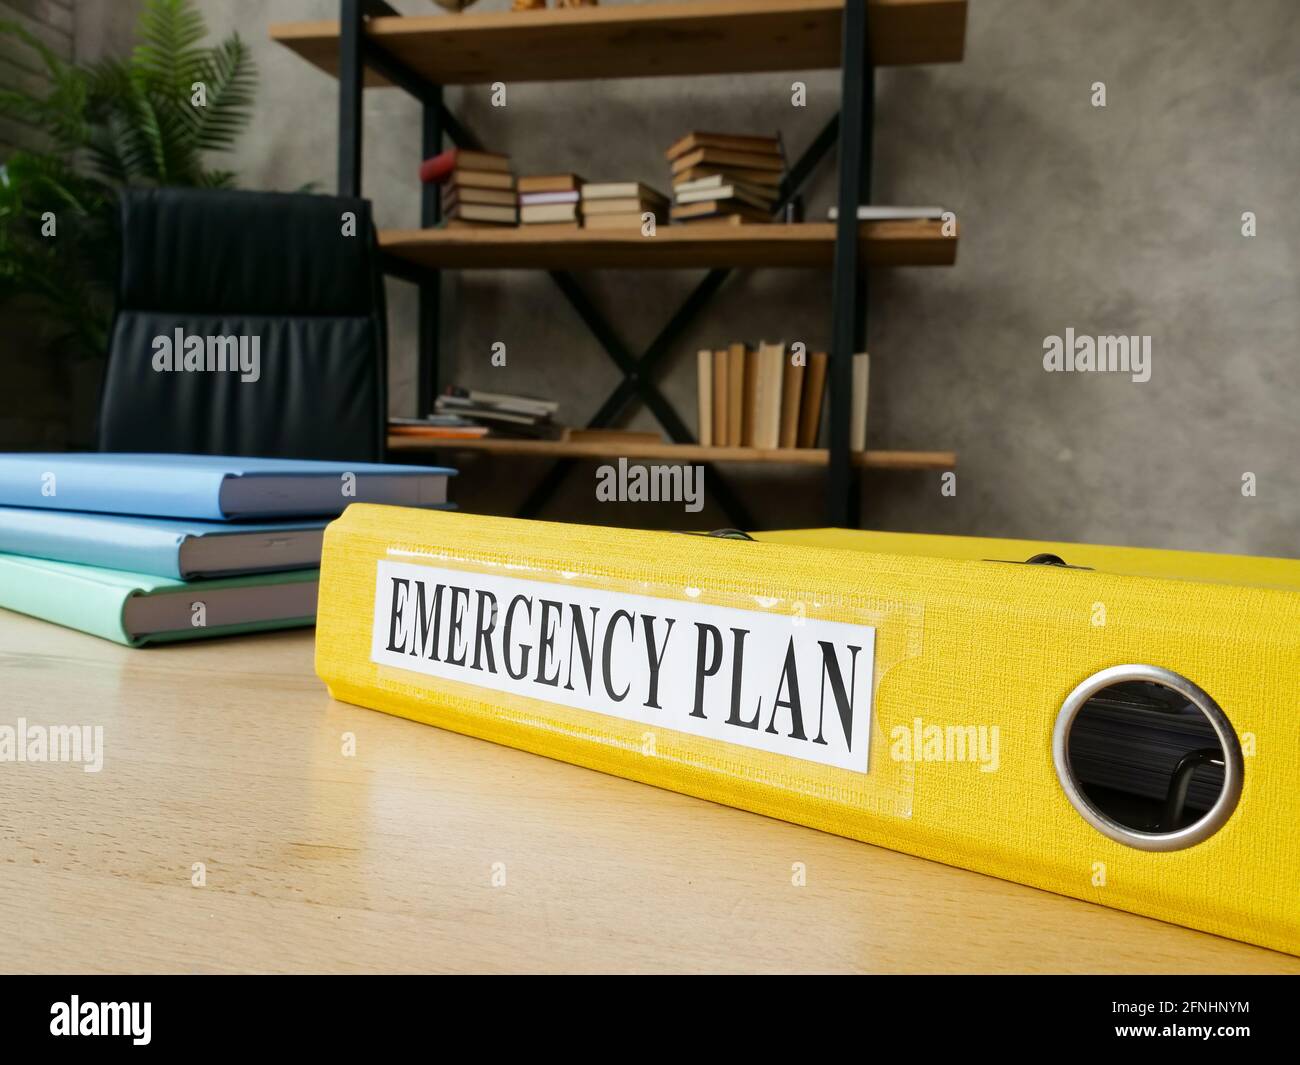 Emergency plan in the yellow folder on the desk. Stock Photo